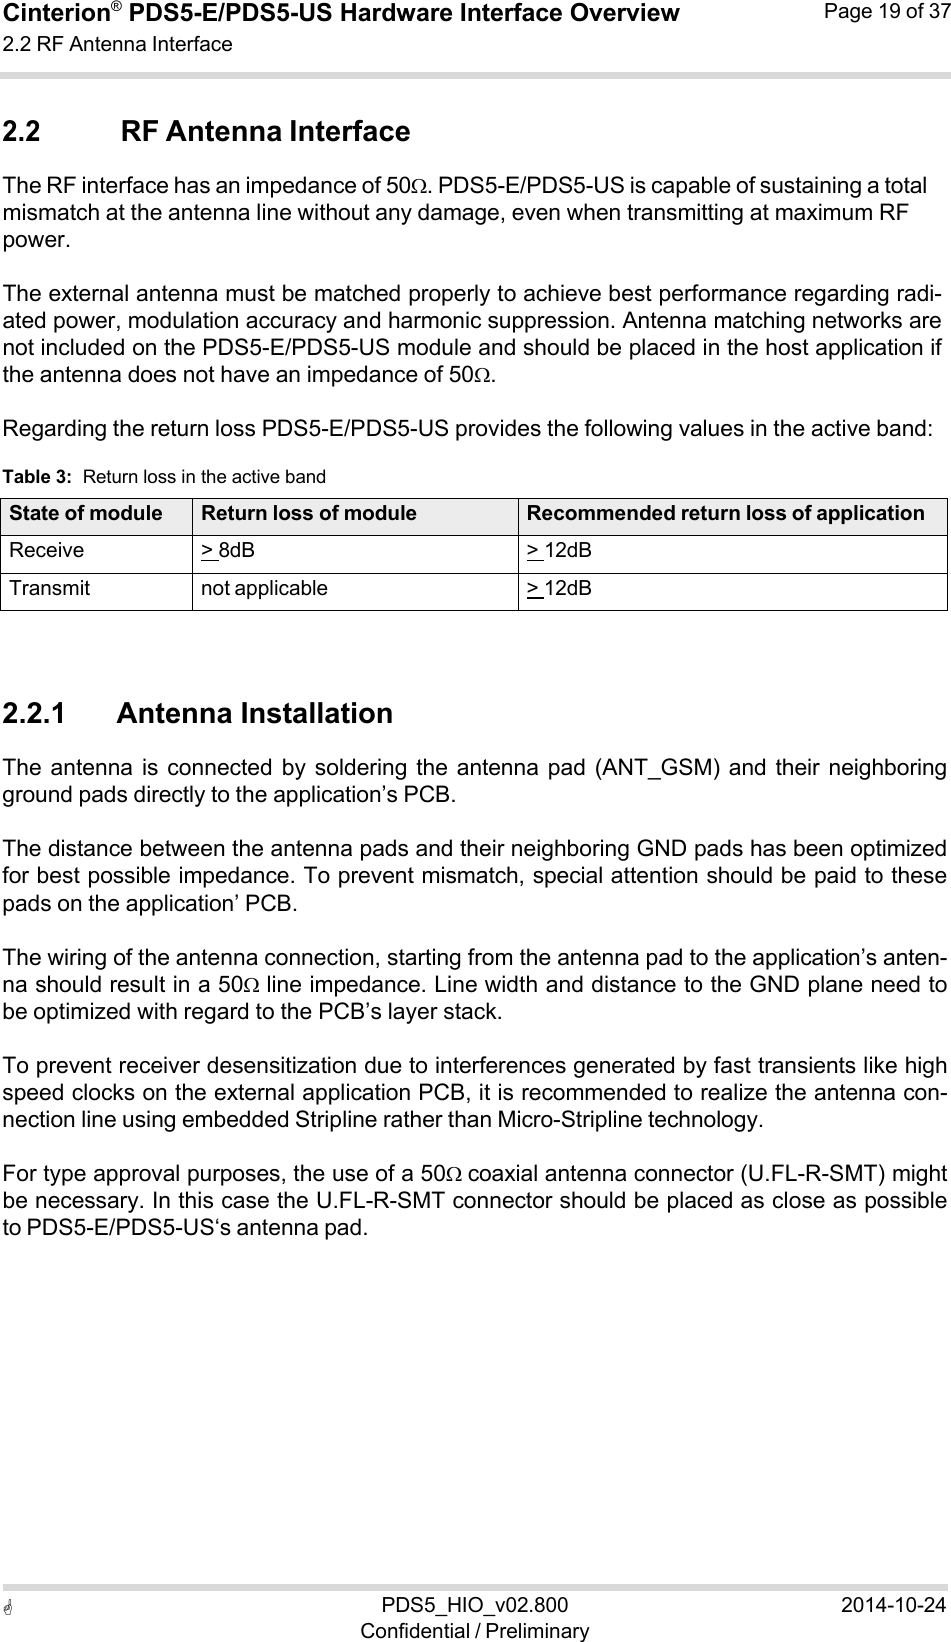  PDS5_HIO_v02.800Confidential / Preliminary2014-10-24Cinterion®  PDS5-E/PDS5-US Hardware Interface Overview2.2 RF Antenna Interface Page 19 of 37   2.2 RF Antenna Interface The RF interface has an impedance of 50. PDS5-E/PDS5-US is capable of sustaining a total mismatch at the antenna line without any damage, even when transmitting at maximum RF power.  The external antenna must be matched properly to achieve best performance regarding radi- ated power, modulation accuracy and harmonic suppression. Antenna matching networks are not included on the PDS5-E/PDS5-US module and should be placed in the host application if the antenna does not have an impedance of 50.  Regarding the return loss PDS5-E/PDS5-US provides the following values in the active band:  Table 3:  Return loss in the active band  State of module Return loss of module Recommended return loss of applicationReceive &gt; 8dB &gt; 12dBTransmit not applicable &gt; 12dB   2.2.1      Antenna Installation The antenna  is connected  by  soldering  the antenna  pad  (ANT_GSM)  and their  neighboring ground pads directly to the application’s PCB.  The distance between the antenna pads and their neighboring GND pads has been optimized for best possible impedance. To prevent mismatch, special attention should be paid to these pads on the application’ PCB.  The wiring of the antenna connection, starting from the antenna pad to the application’s anten- na should result in a 50 line impedance. Line width and distance to the GND plane need to be optimized with regard to the PCB’s layer stack.  To prevent receiver desensitization due to interferences generated by fast transients like high speed clocks on the external application PCB, it is recommended to realize the antenna con- nection line using embedded Stripline rather than Micro-Stripline technology.  For type approval purposes, the use of a 50coaxial antenna connector (U.FL-R-SMT) might be necessary. In this case the U.FL-R-SMT connector should be placed as close as possible to PDS5-E/PDS5-US‘s antenna pad. 